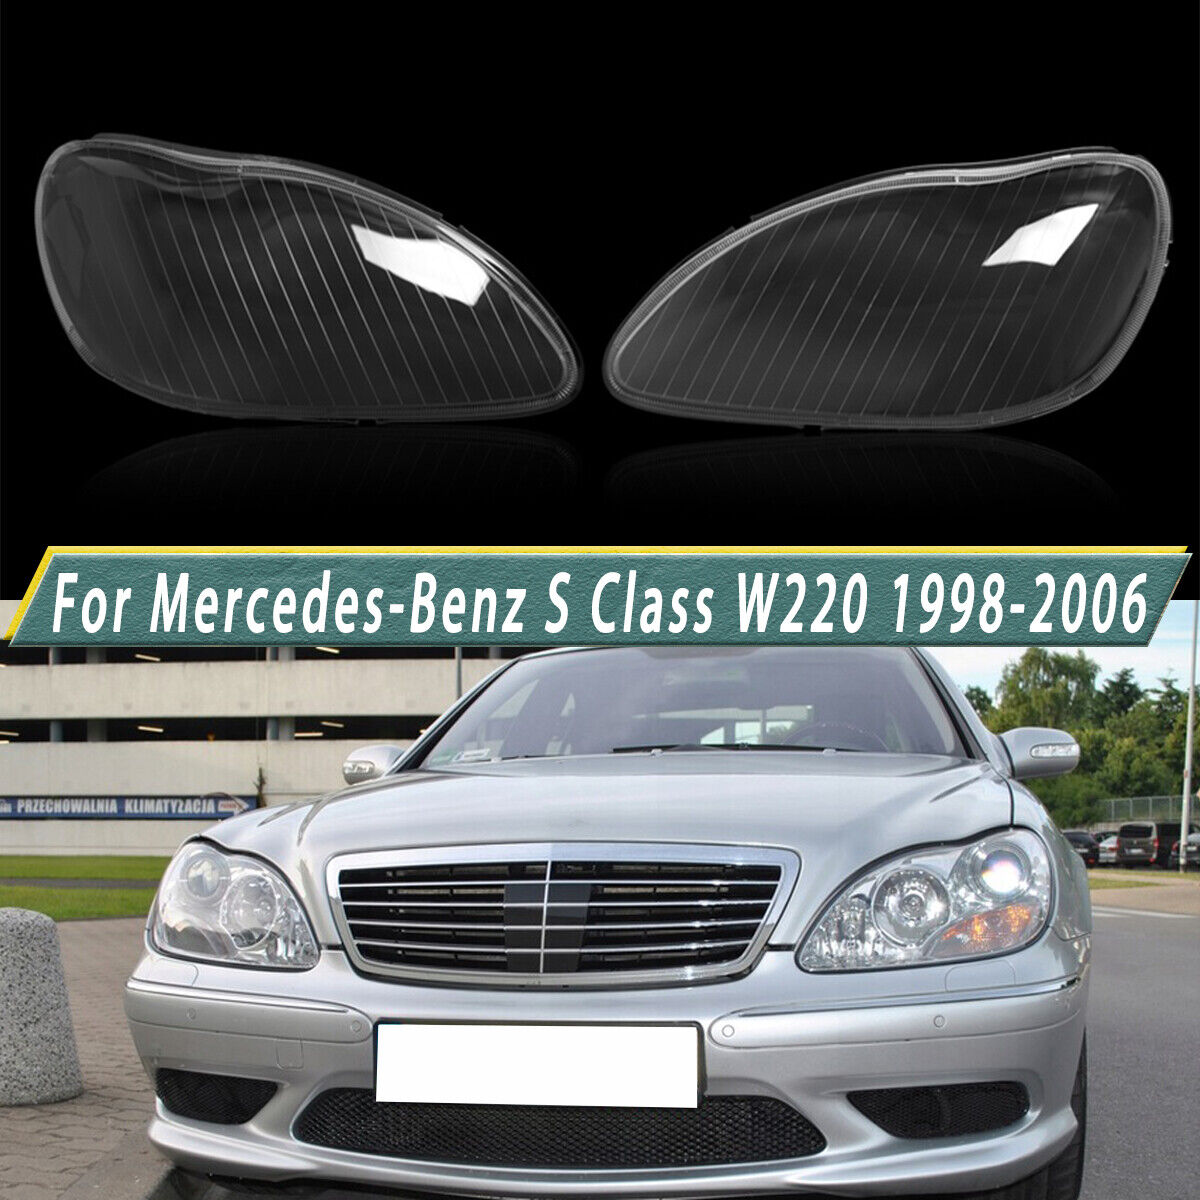 1Pair Headlight Lens Cover Clear For Mercedes-Benz W220 S430 S500 S600 1998-2006